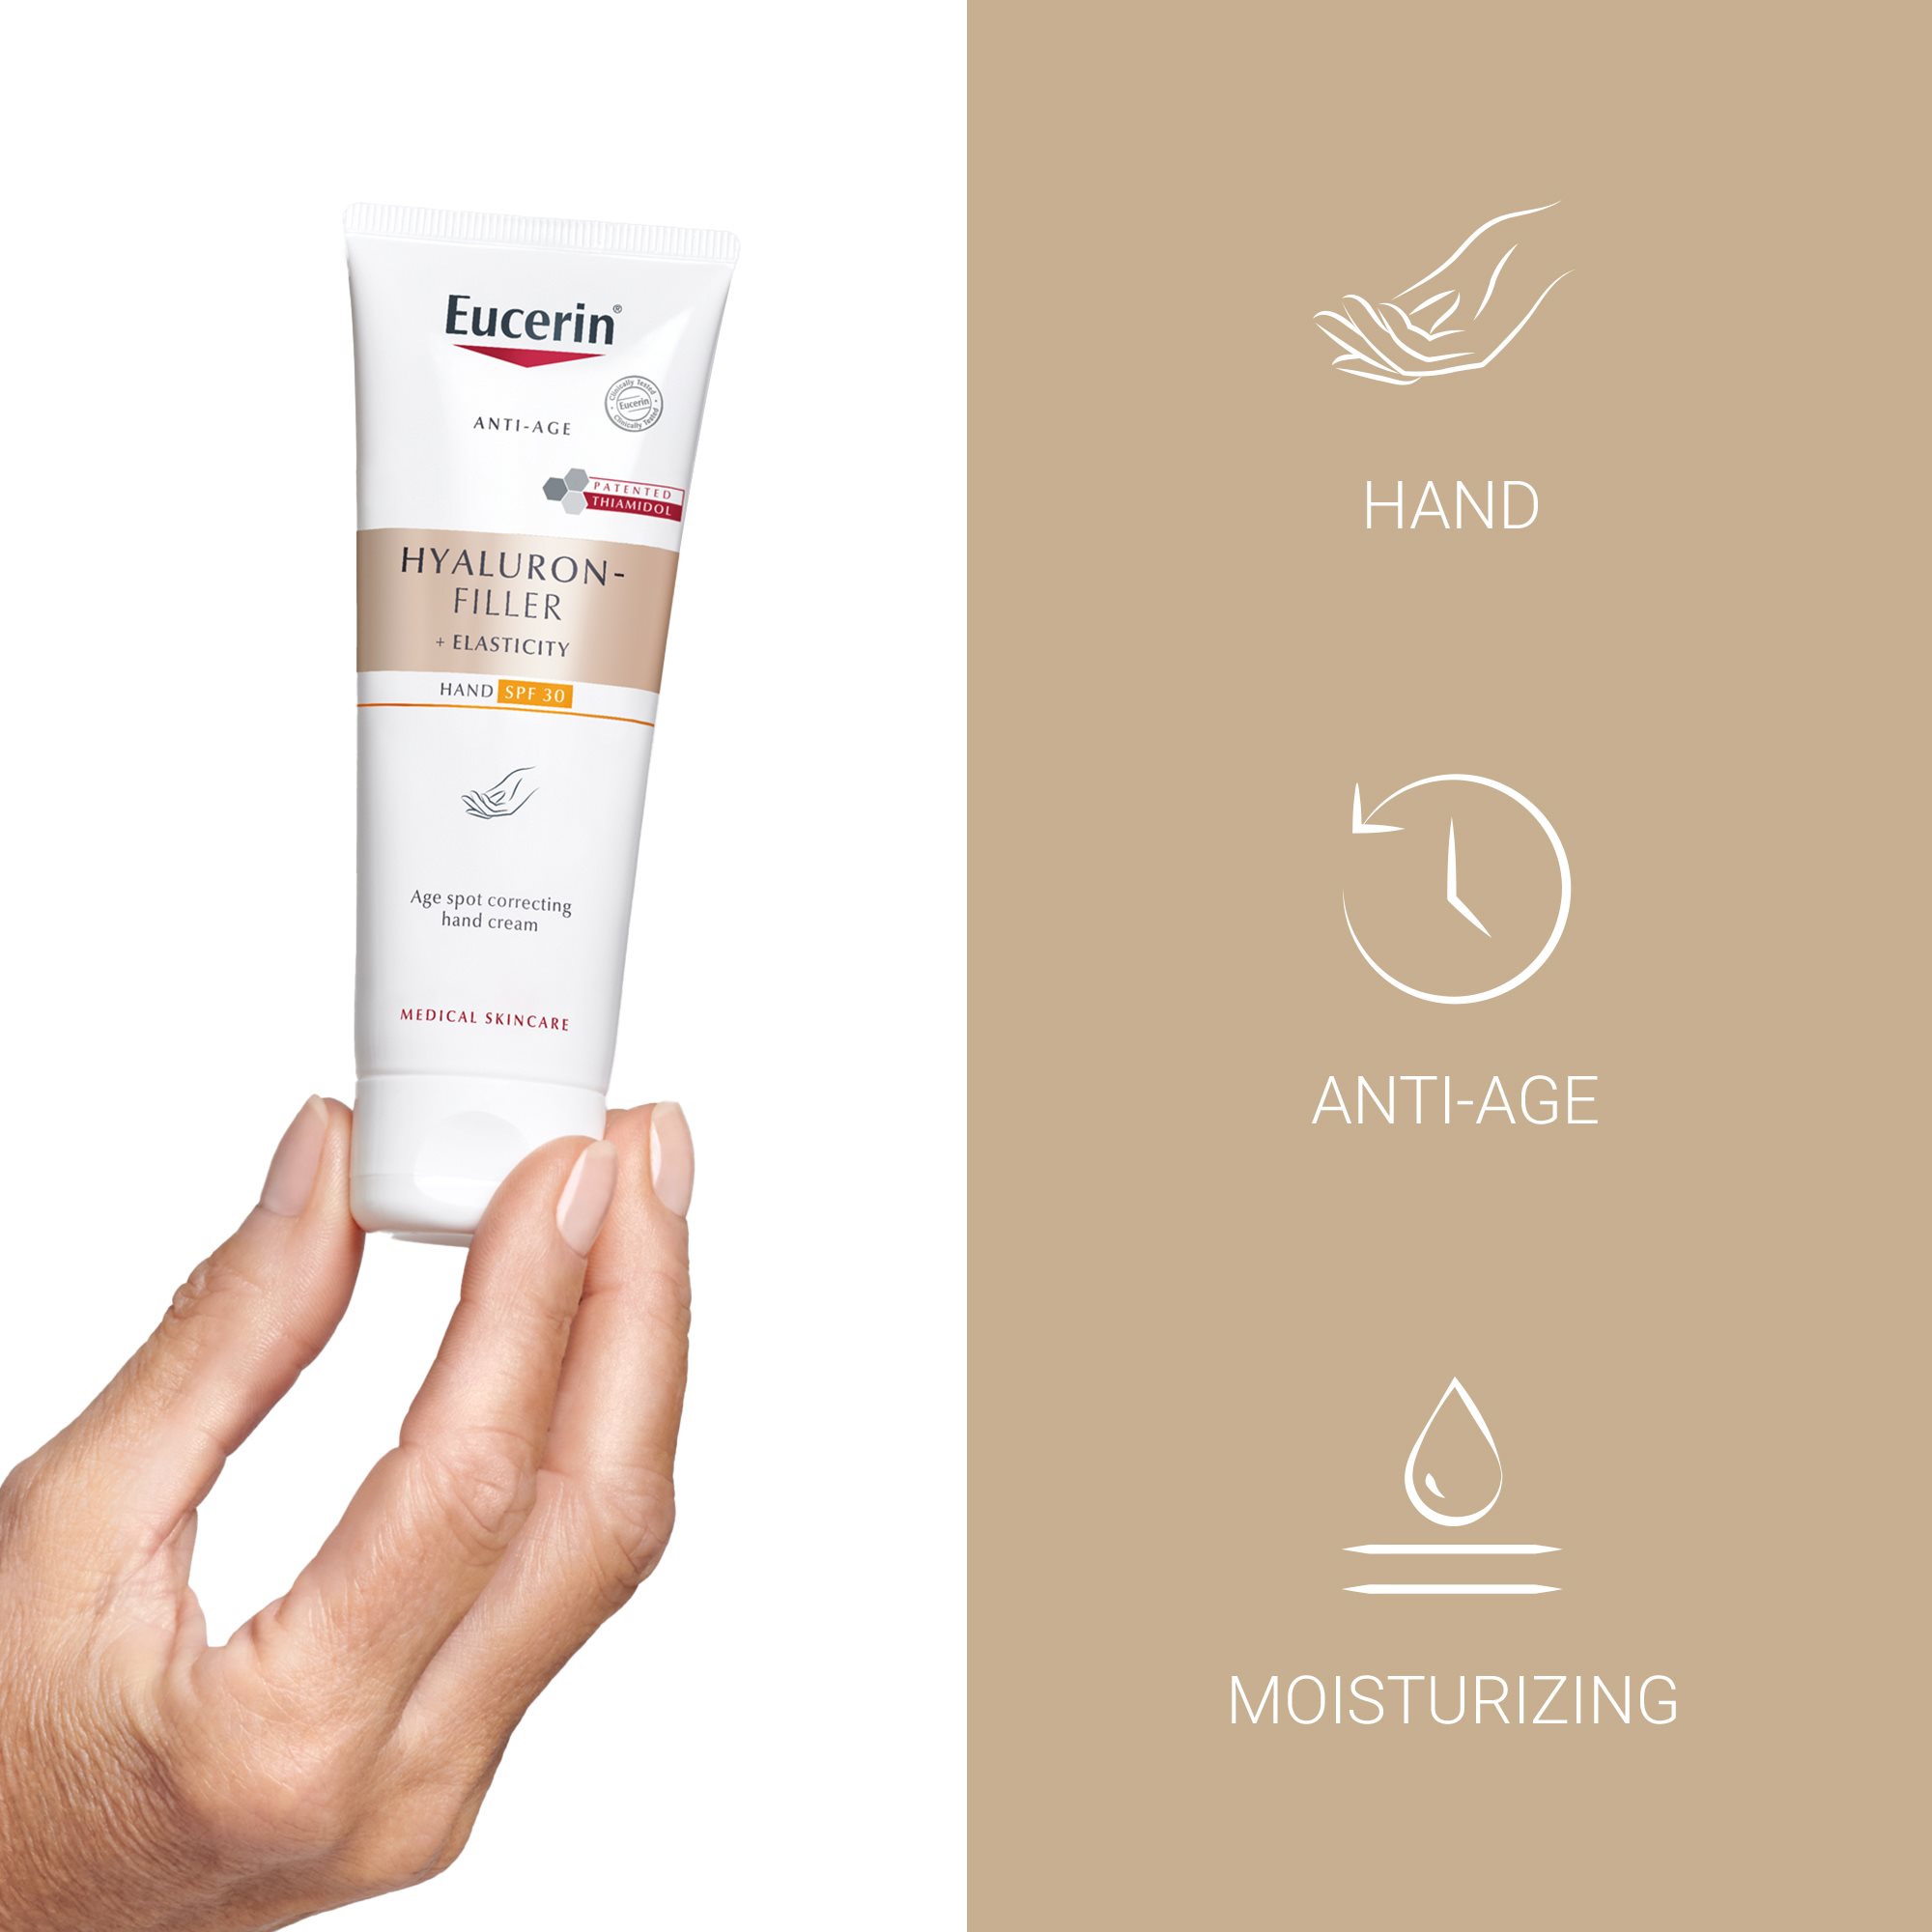 Eucerin Hyaluron-Filler + Elasticity Age Spot Correcting Hand Cream - Massage into your hands until the cream is completely absorbed